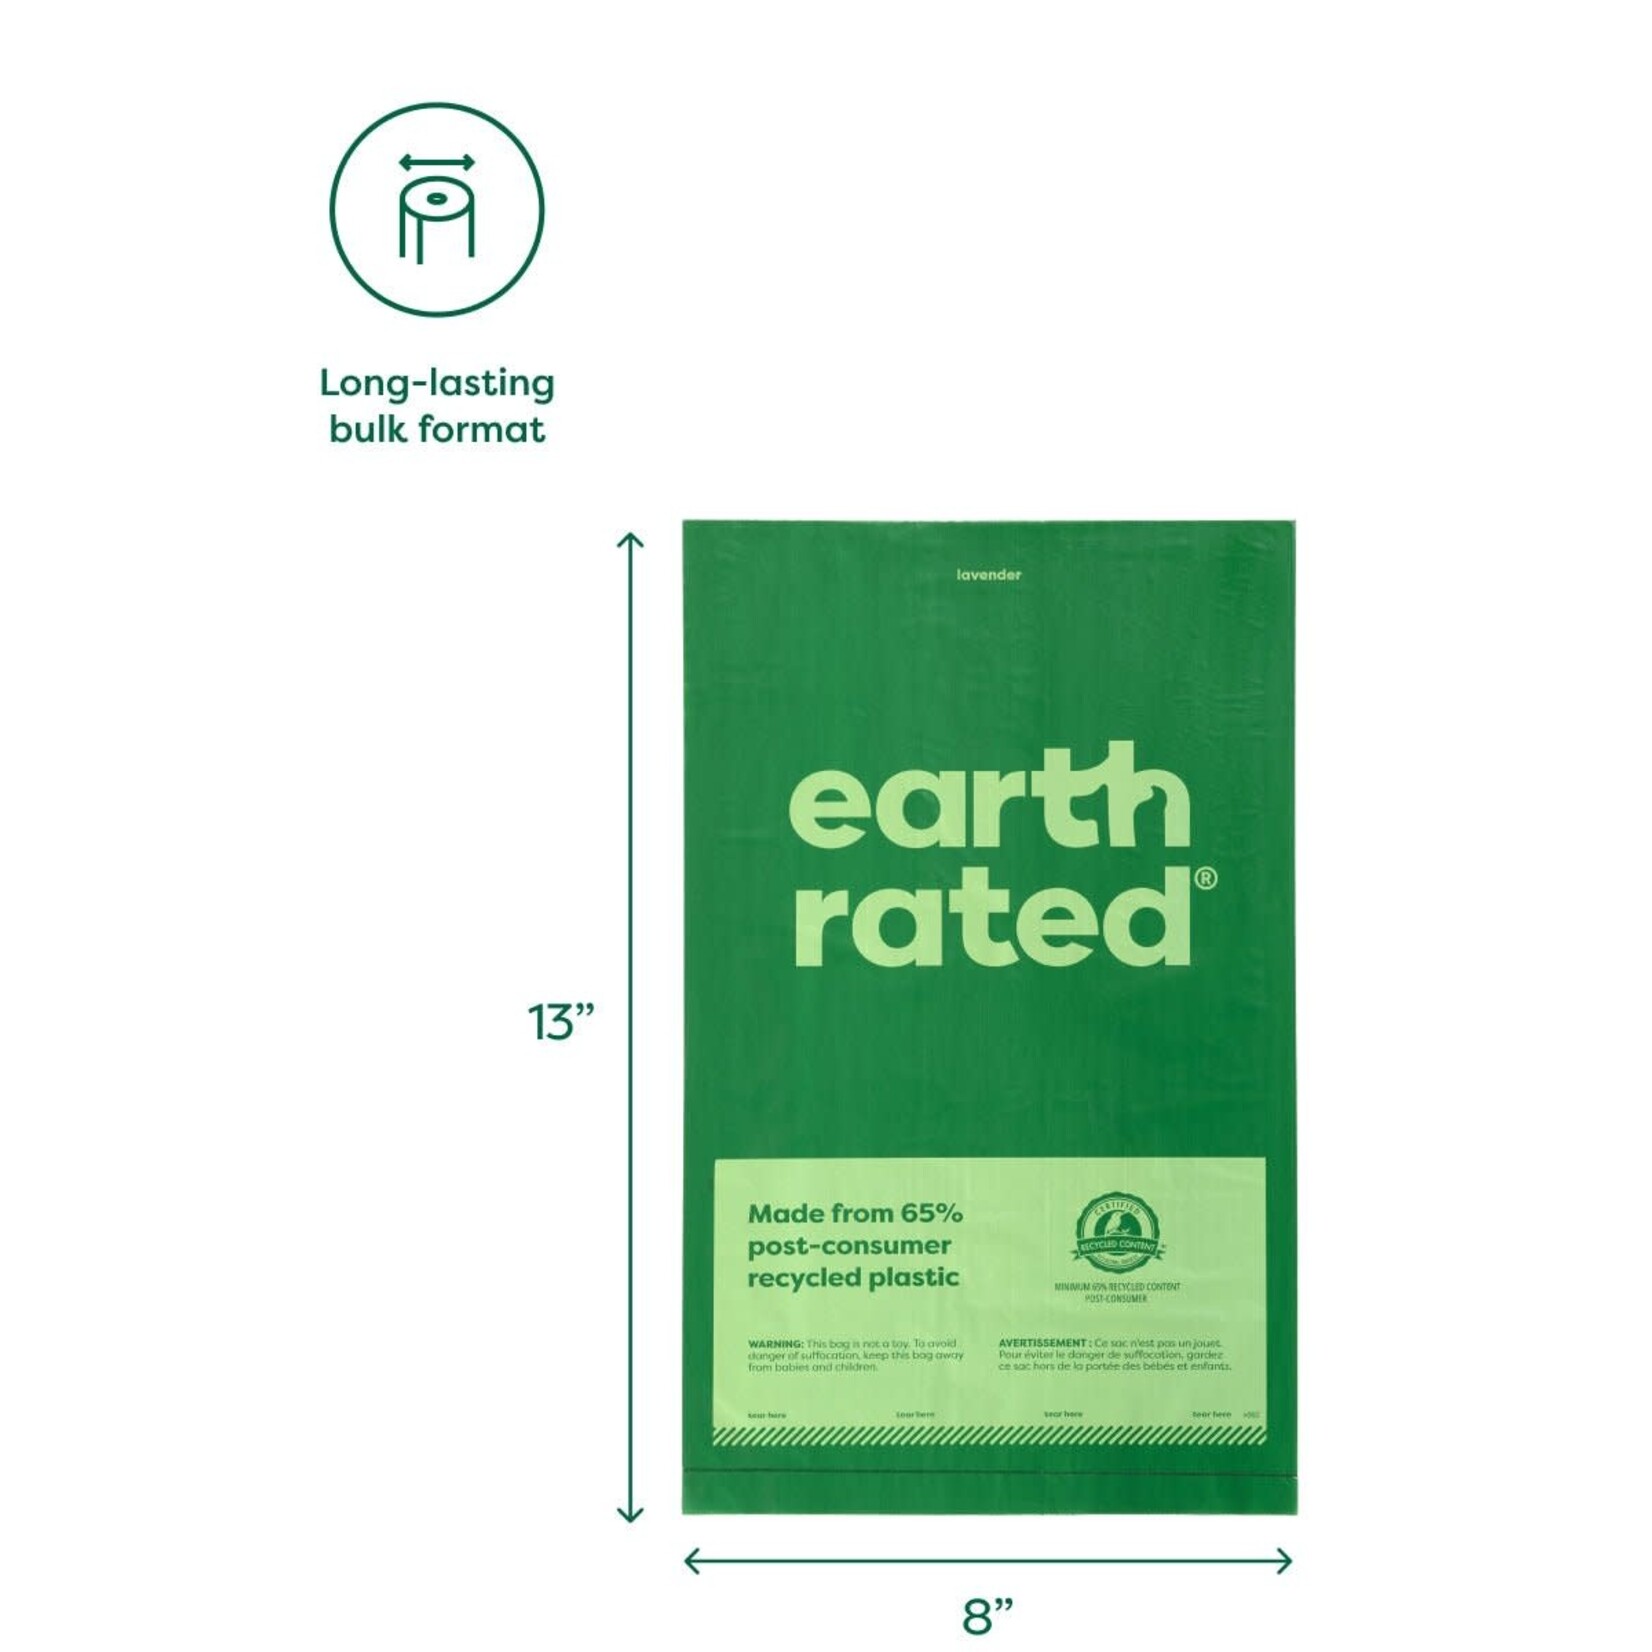 Earth Rated 300 Bags on a Large Single Roll - Lavender Scented